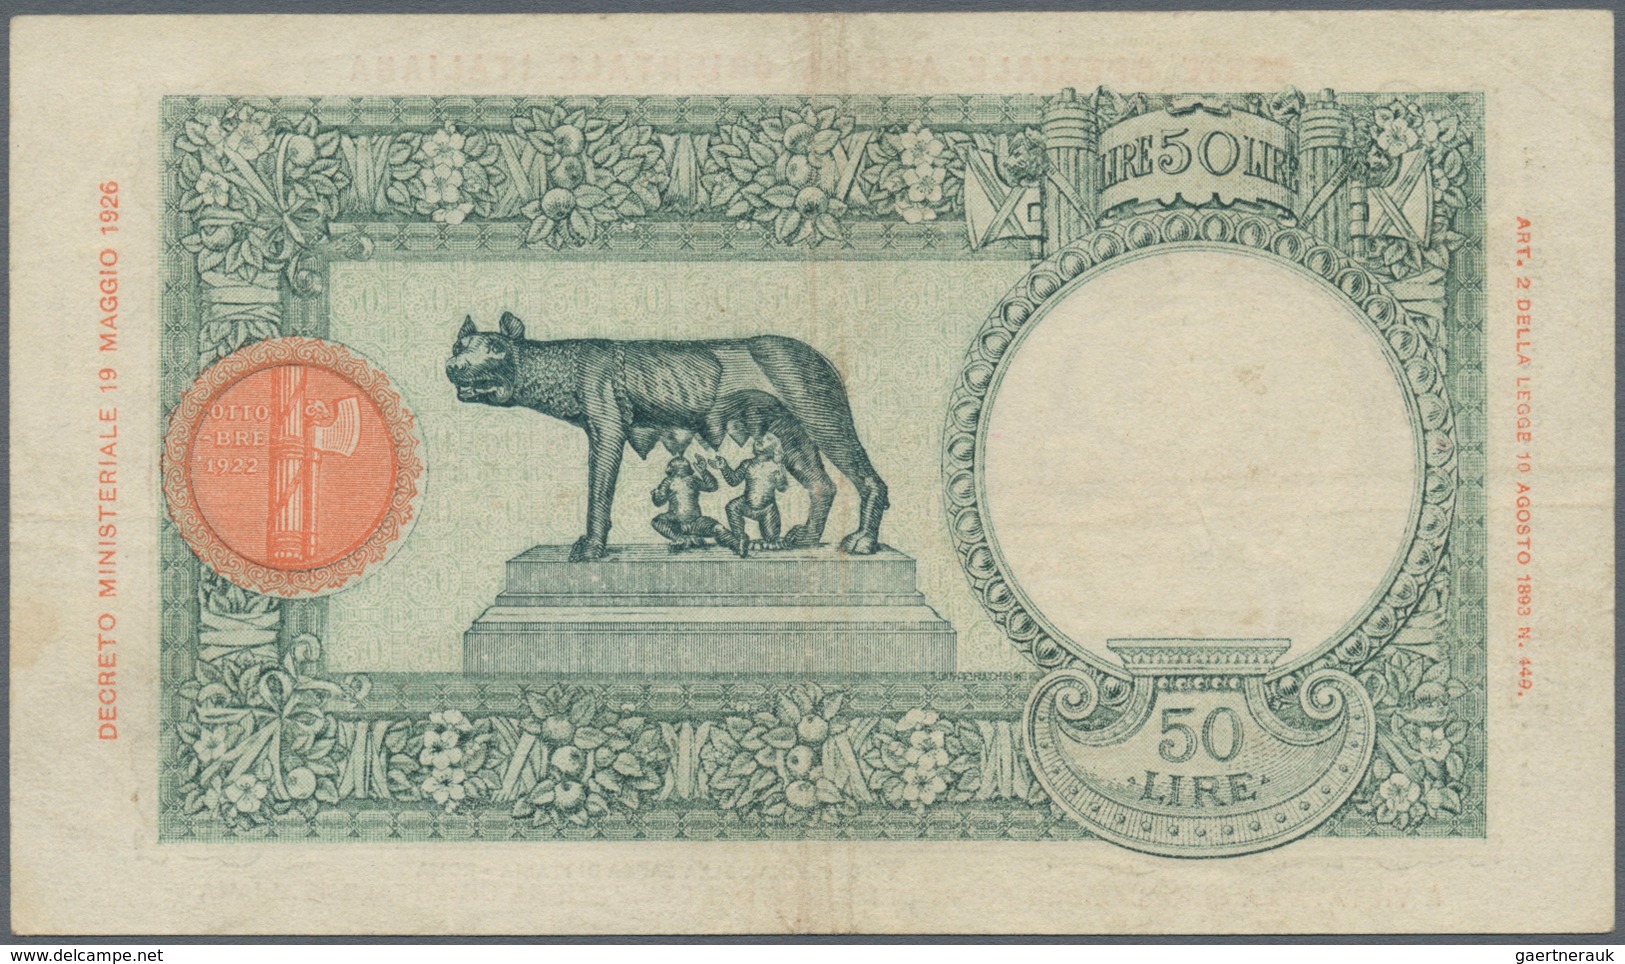 Italian East Africa / Italienisch Ost-Afrika: Set Of 2 Notes 50 Lire 1938 P. 1, The First With Only - Italiaans Oost-Afrika